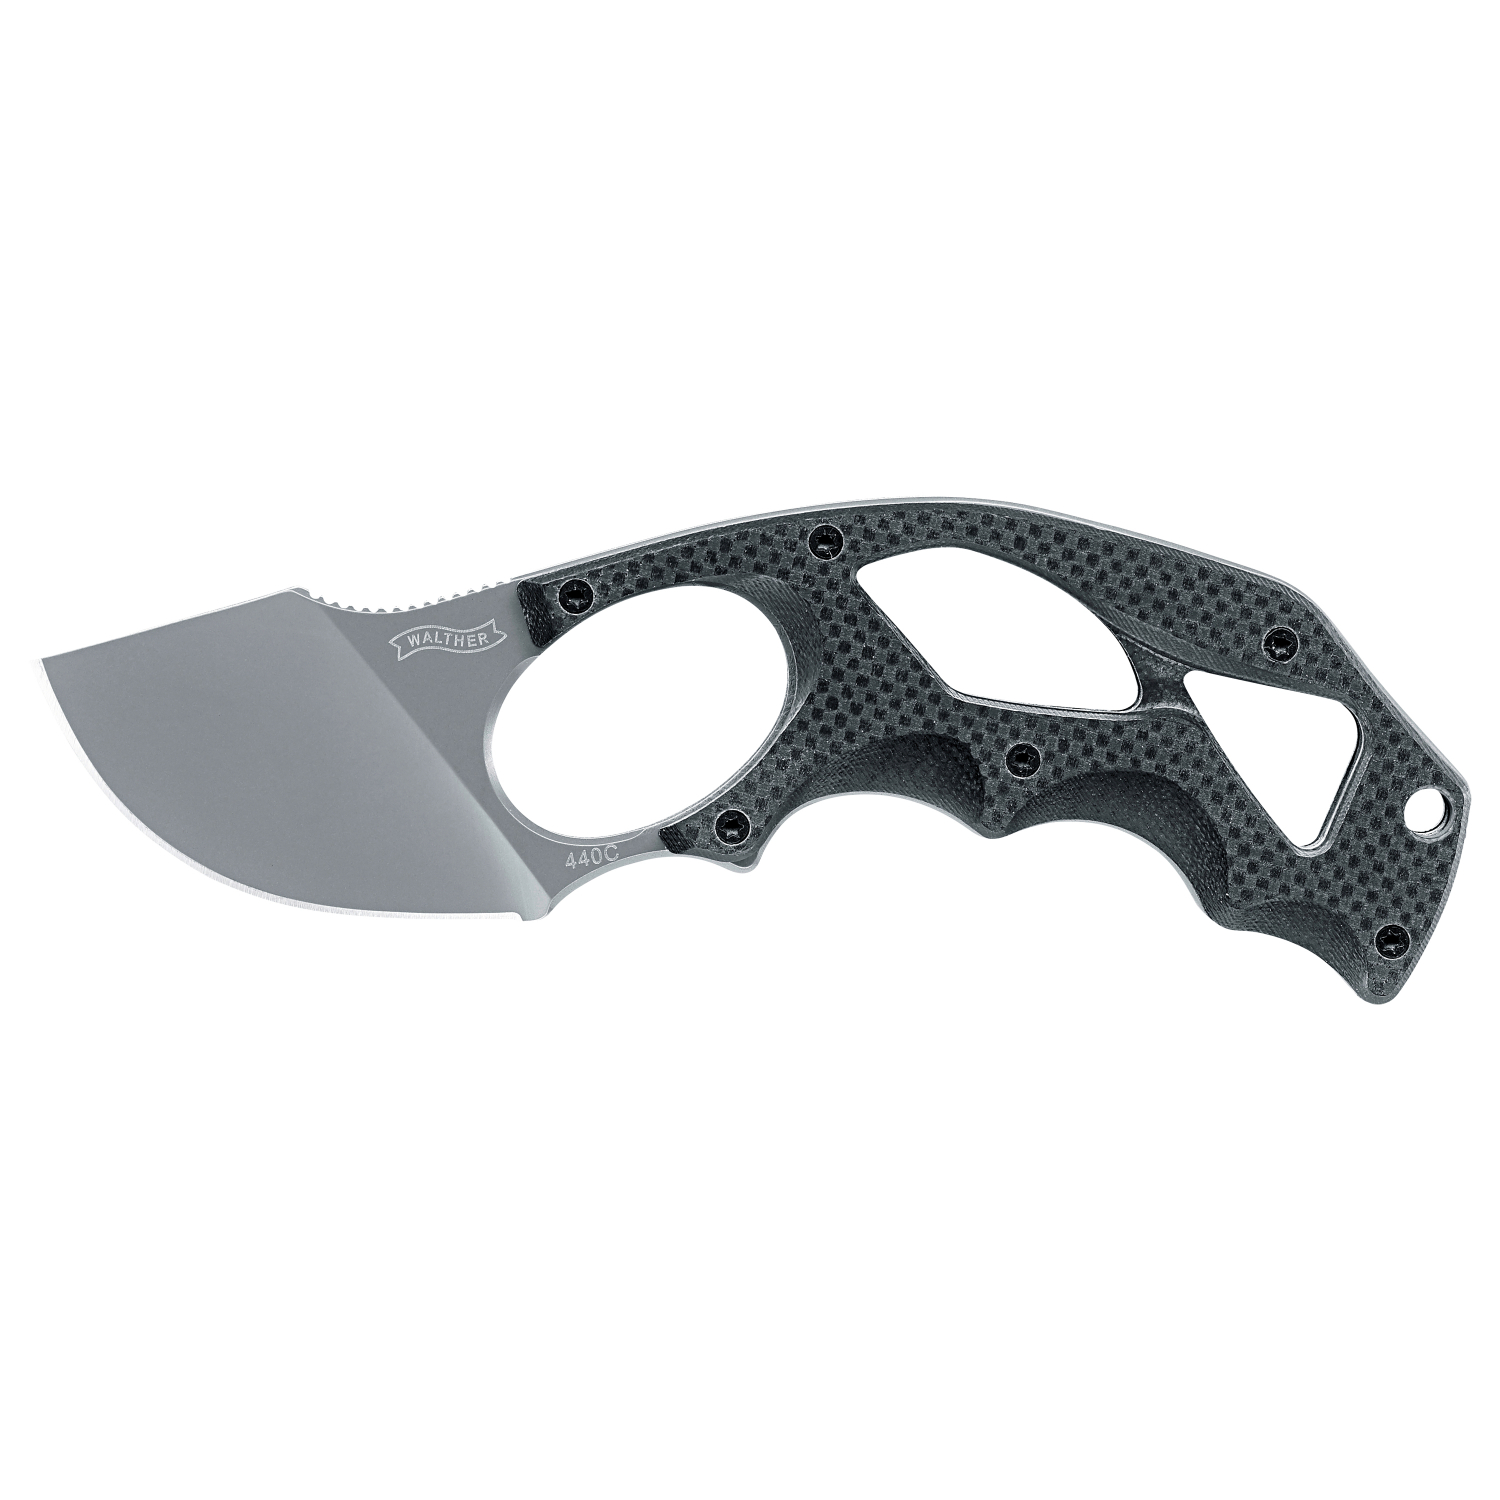 Walther Walther Tactical Skinner Knife 